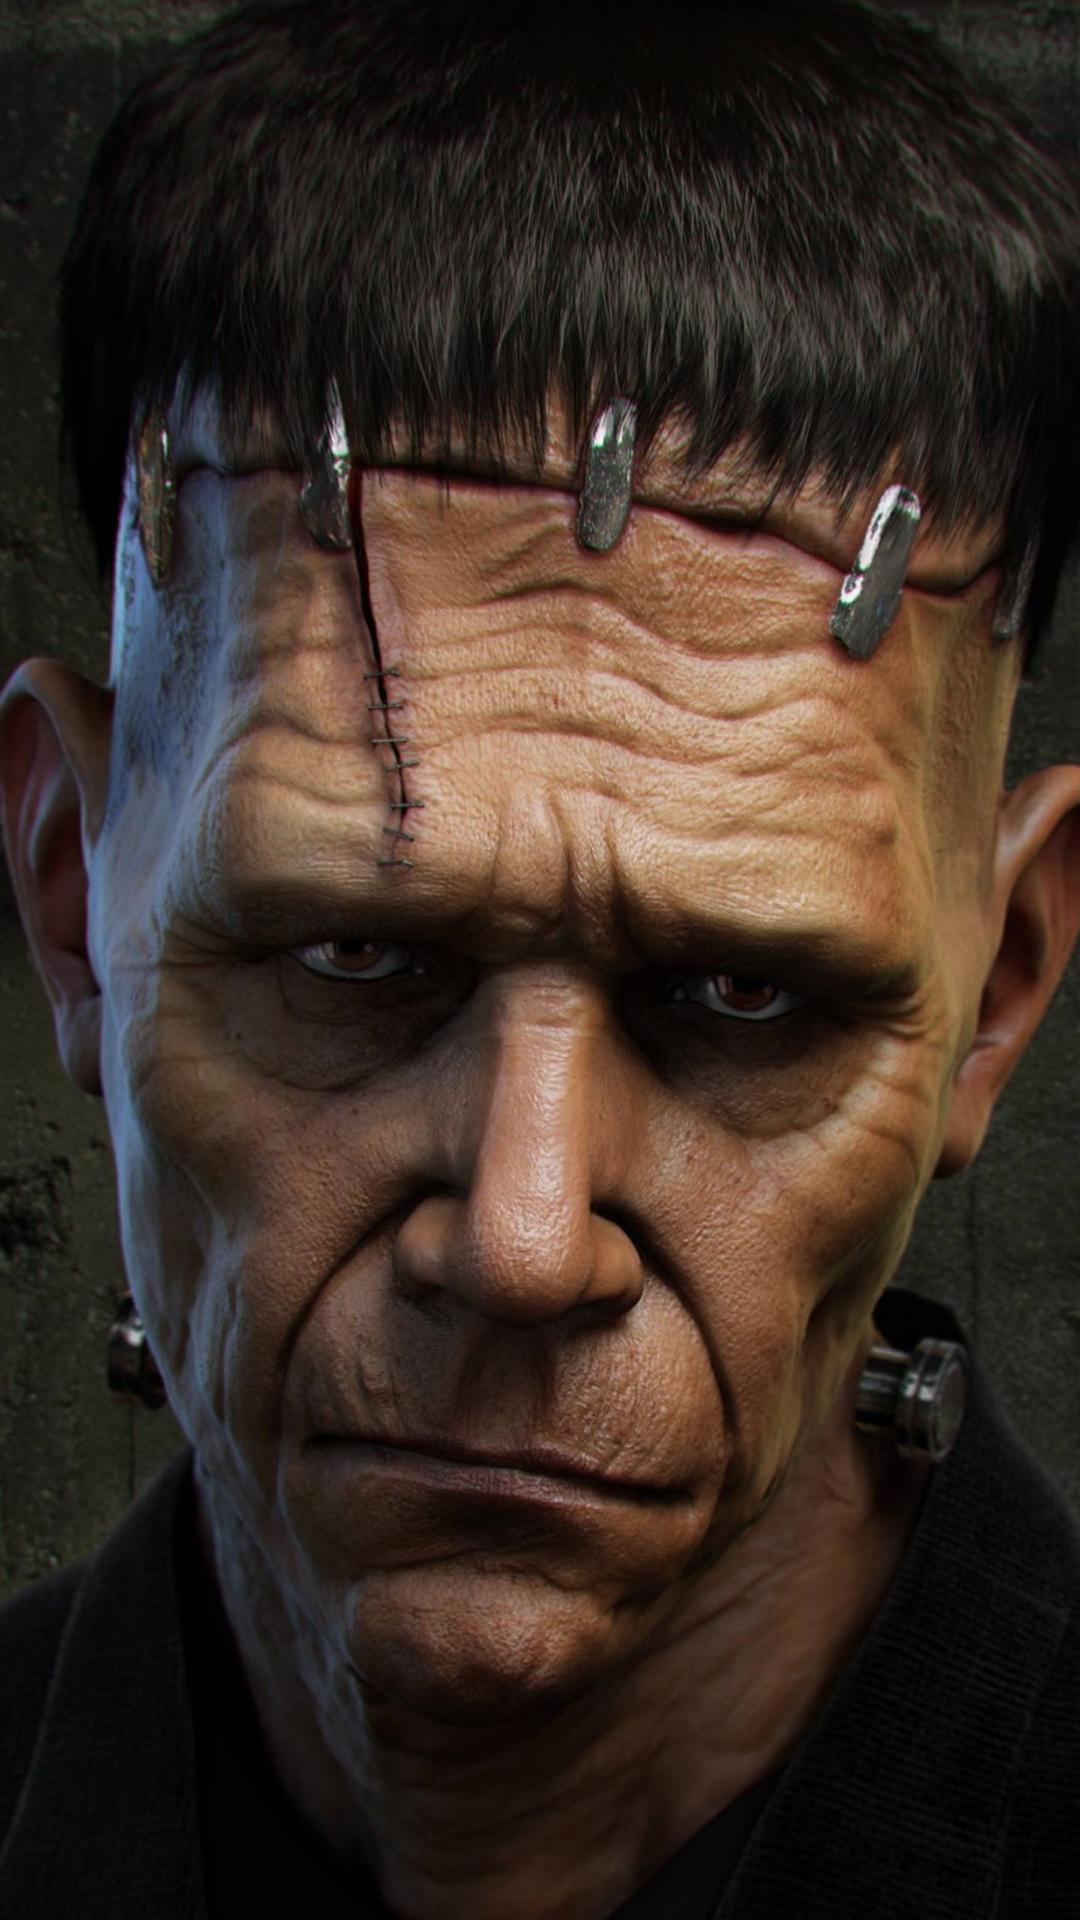 Sad Frankenstein Halloween htc one wallpaper, free and easy to download